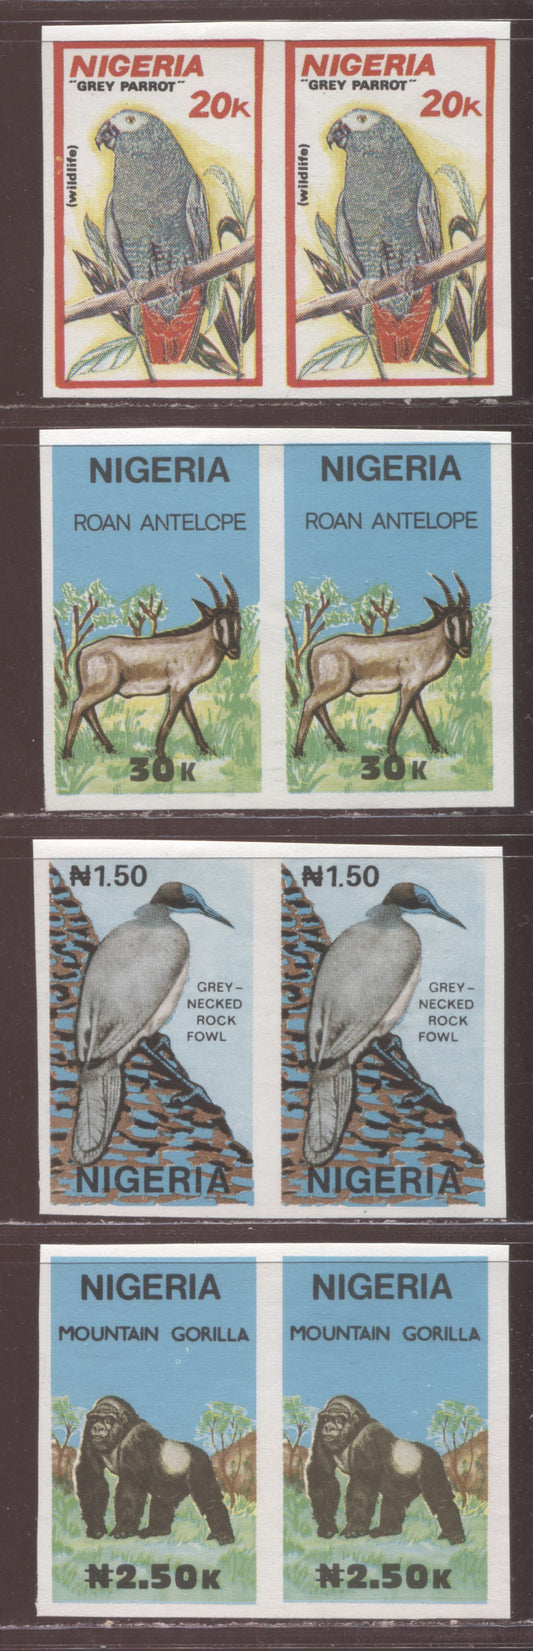 Nigeria SC#571var-574var 1990 Wildlife Issue, 4 VFNH Imperf Horizontal Pairs, Click on Listing to See ALL Pictures, Estimated Value $20 USD